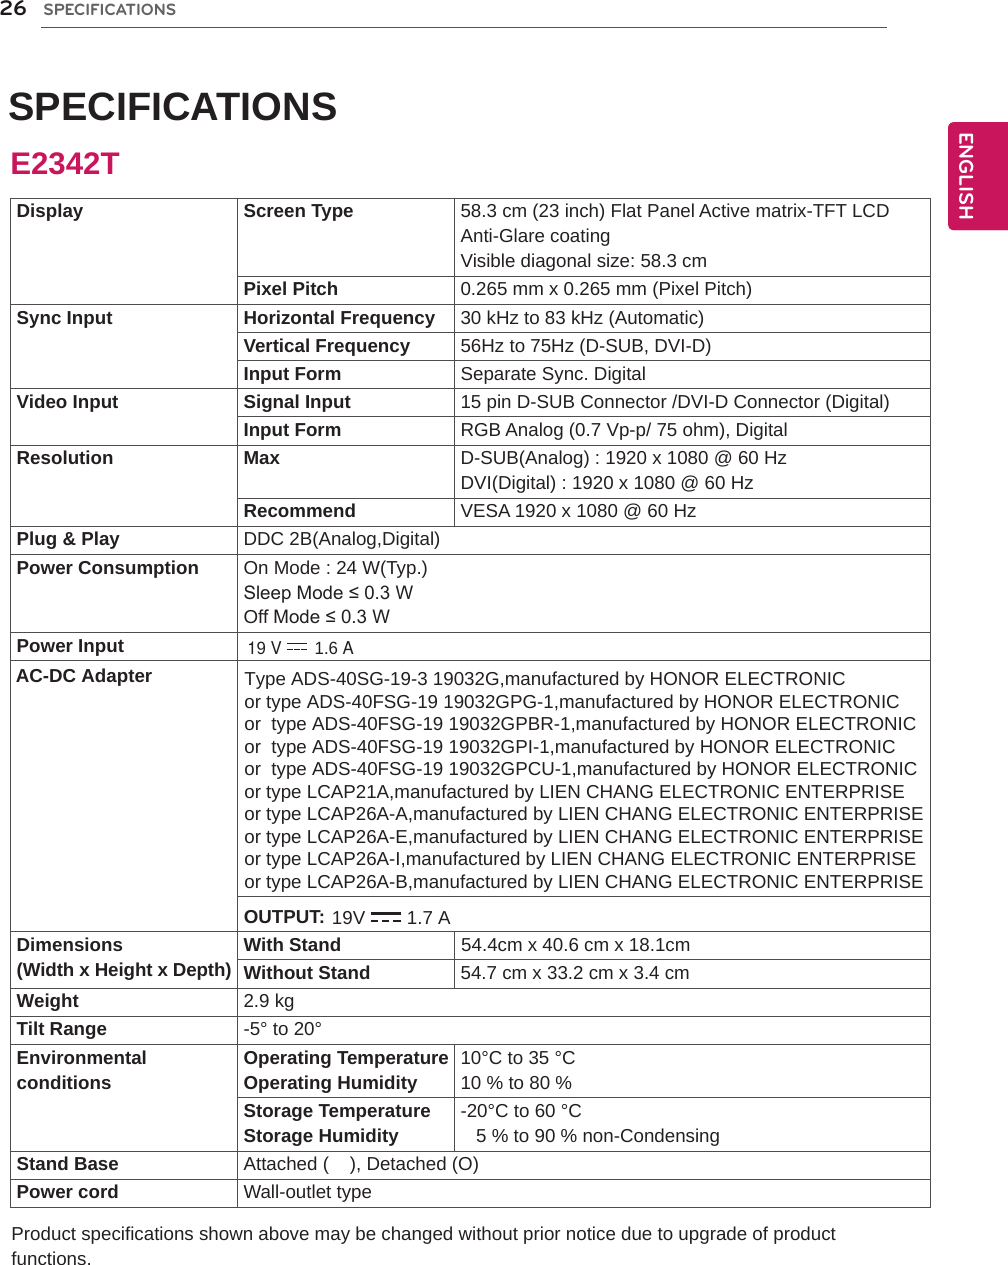 ENGENGLISH SPECIFICATIONS Product specifications shown above may be changed without prior notice due to upgrade of product functions.26SPECIFICATIONSDisplay Screen Type 58.3 cm (23 inch) Flat Panel Active matrix-TFT LCDAnti-Glare coatingVisible diagonal size: 58.3 cmPixel Pitch 0.265 mm x 0.265 mm (Pixel Pitch)Sync Input Horizontal Frequency 30 kHz to 83 kHz (Automatic)Vertical Frequency 56Hz to 75Hz (D-SUB, DVI-D)Input Form Separate Sync. DigitalVideo Input Signal Input 15 pin D-SUB Connector /DVI-D Connector (Digital)Input Form RGB Analog (0.7 Vp-p/ 75 ohm), DigitalResolution Max D-SUB(Analog) : 1920 x 1080 @ 60 HzDVI(Digital) : 1920 x 1080 @ 60 HzRecommend VESA 1920 x 1080 @ 60 HzPlug &amp; Play DDC 2B(Analog,Digital)Power Consumption On Mode : 24 W(Typ.)Sleep Mode ≤ 0.3 W Off Mode ≤ 0.3 W Power InputDimensions(Width x Height x Depth) With Stand                       54.4cm x 40.6 cm x 18.1cmWithout Stand 54.7 cm x 33.2 cm x 3.4 cmWeight 2.9 kgTilt Range -5° to 20°Environmentalconditions Operating TemperatureOperating Humidity 10°C to 35 °C10 % to 80 % Storage TemperatureStorage Humidity -20°C to 60 °C   5 % to 90 % non-CondensingStand Base Attached (    ), Detached (O)Power cord Wall-outlet typeE2342T19 V 1.6 A AC-DC Adapter19V 1.7 AType ADS-40SG-19-3 19032G,manufactured by HONOR ELECTRONICor type ADS-40FSG-19 19032GPG-1,manufactured by HONOR ELECTRONICor  type ADS-40FSG-19 19032GPBR-1,manufactured by HONOR ELECTRONICor  type ADS-40FSG-19 19032GPI-1,manufactured by HONOR ELECTRONIC or  type ADS-40FSG-19 19032GPCU-1,manufactured by HONOR ELECTRONIC or type LCAP21A,manufactured by LIEN CHANG ELECTRONIC ENTERPRISEor type LCAP26A-A,manufactured by LIEN CHANG ELECTRONIC ENTERPRISEor type LCAP26A-E,manufactured by LIEN CHANG ELECTRONIC ENTERPRISEor type LCAP26A-I,manufactured by LIEN CHANG ELECTRONIC ENTERPRISEor type LCAP26A-B,manufactured by LIEN CHANG ELECTRONIC ENTERPRISEOUTPUT: